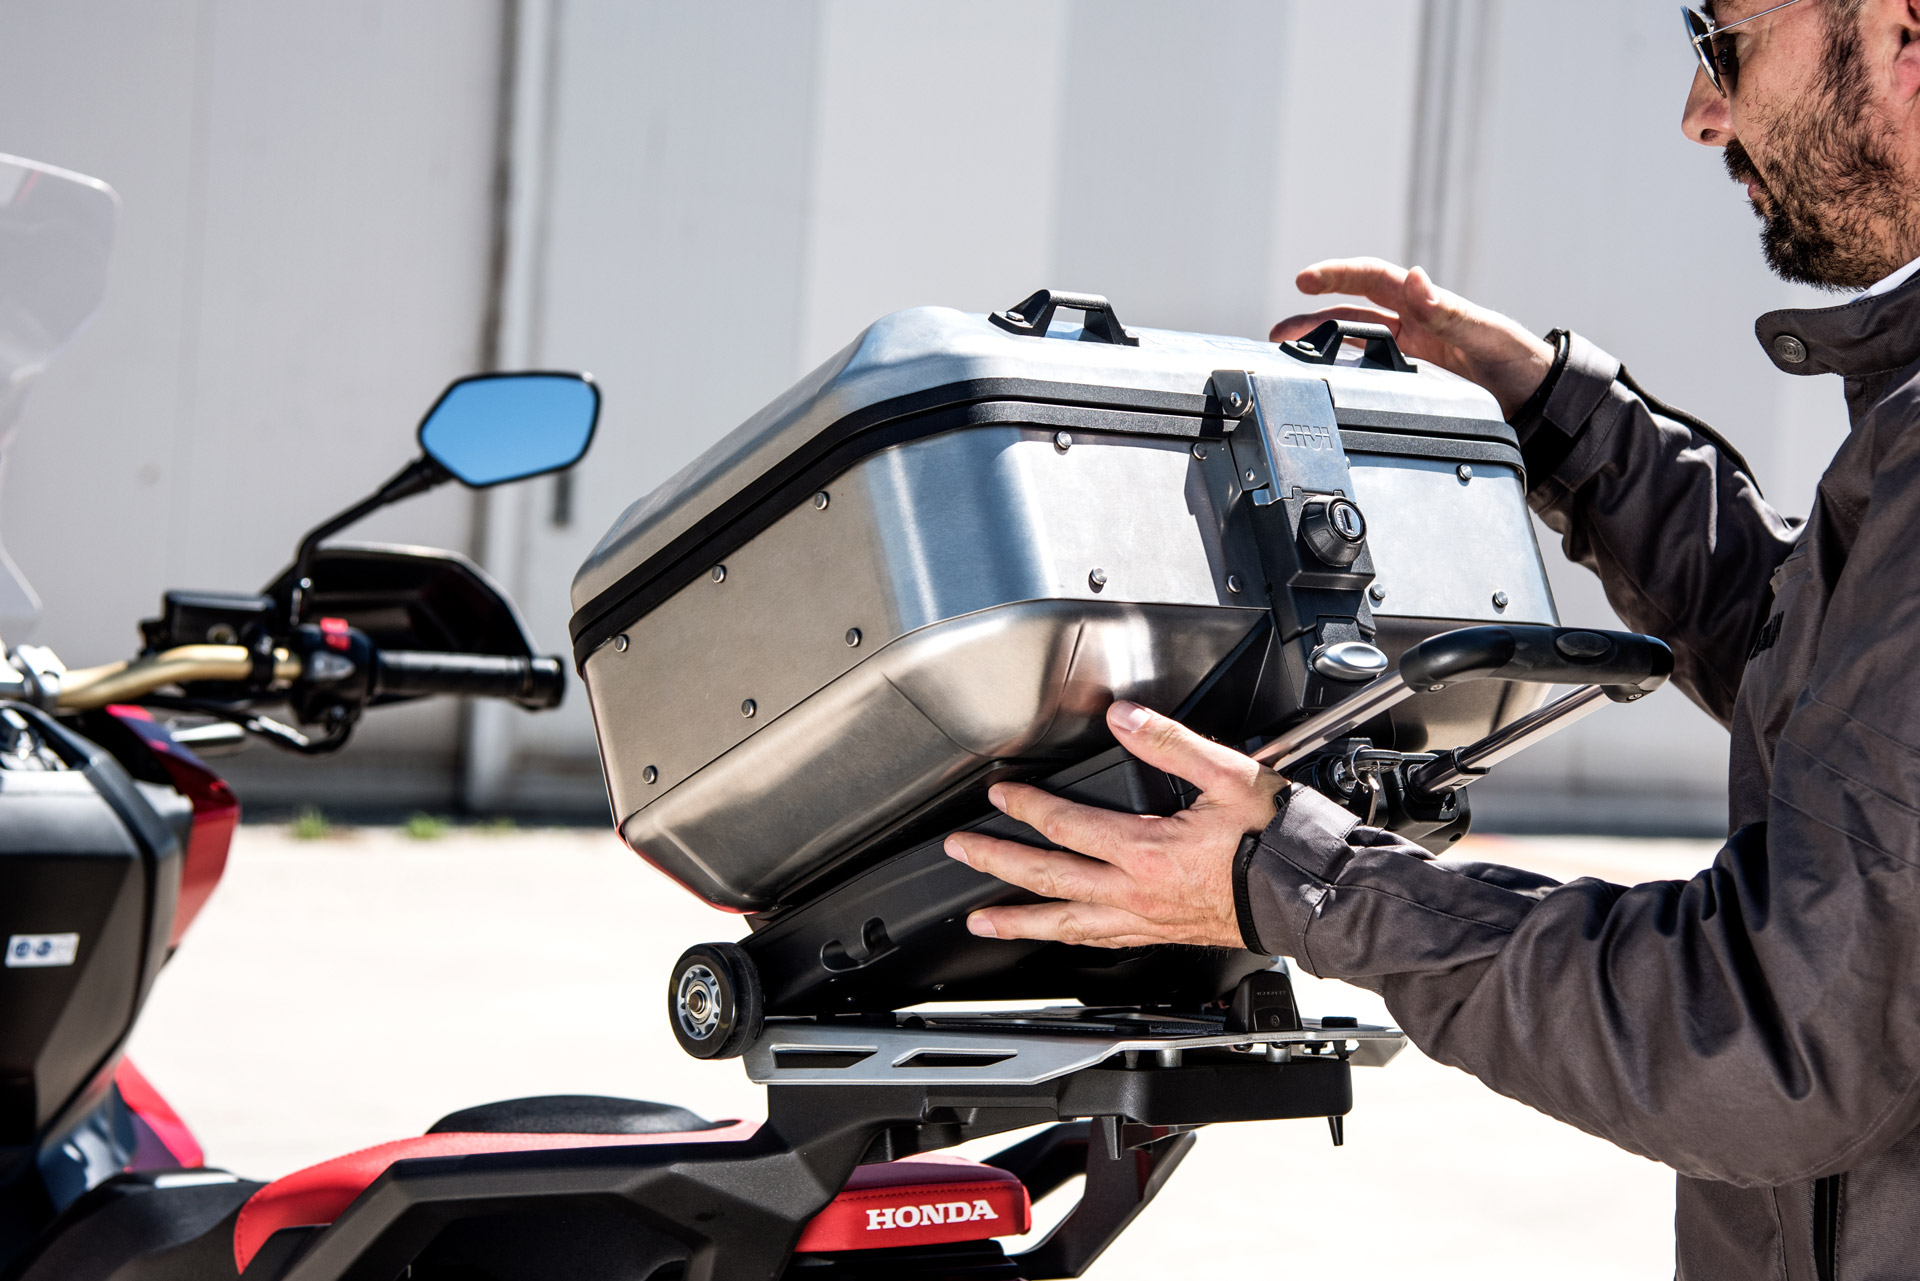 THE+NEW+S410+GIVI+TROLLEY+HAS+JUST+ARRIVED%21